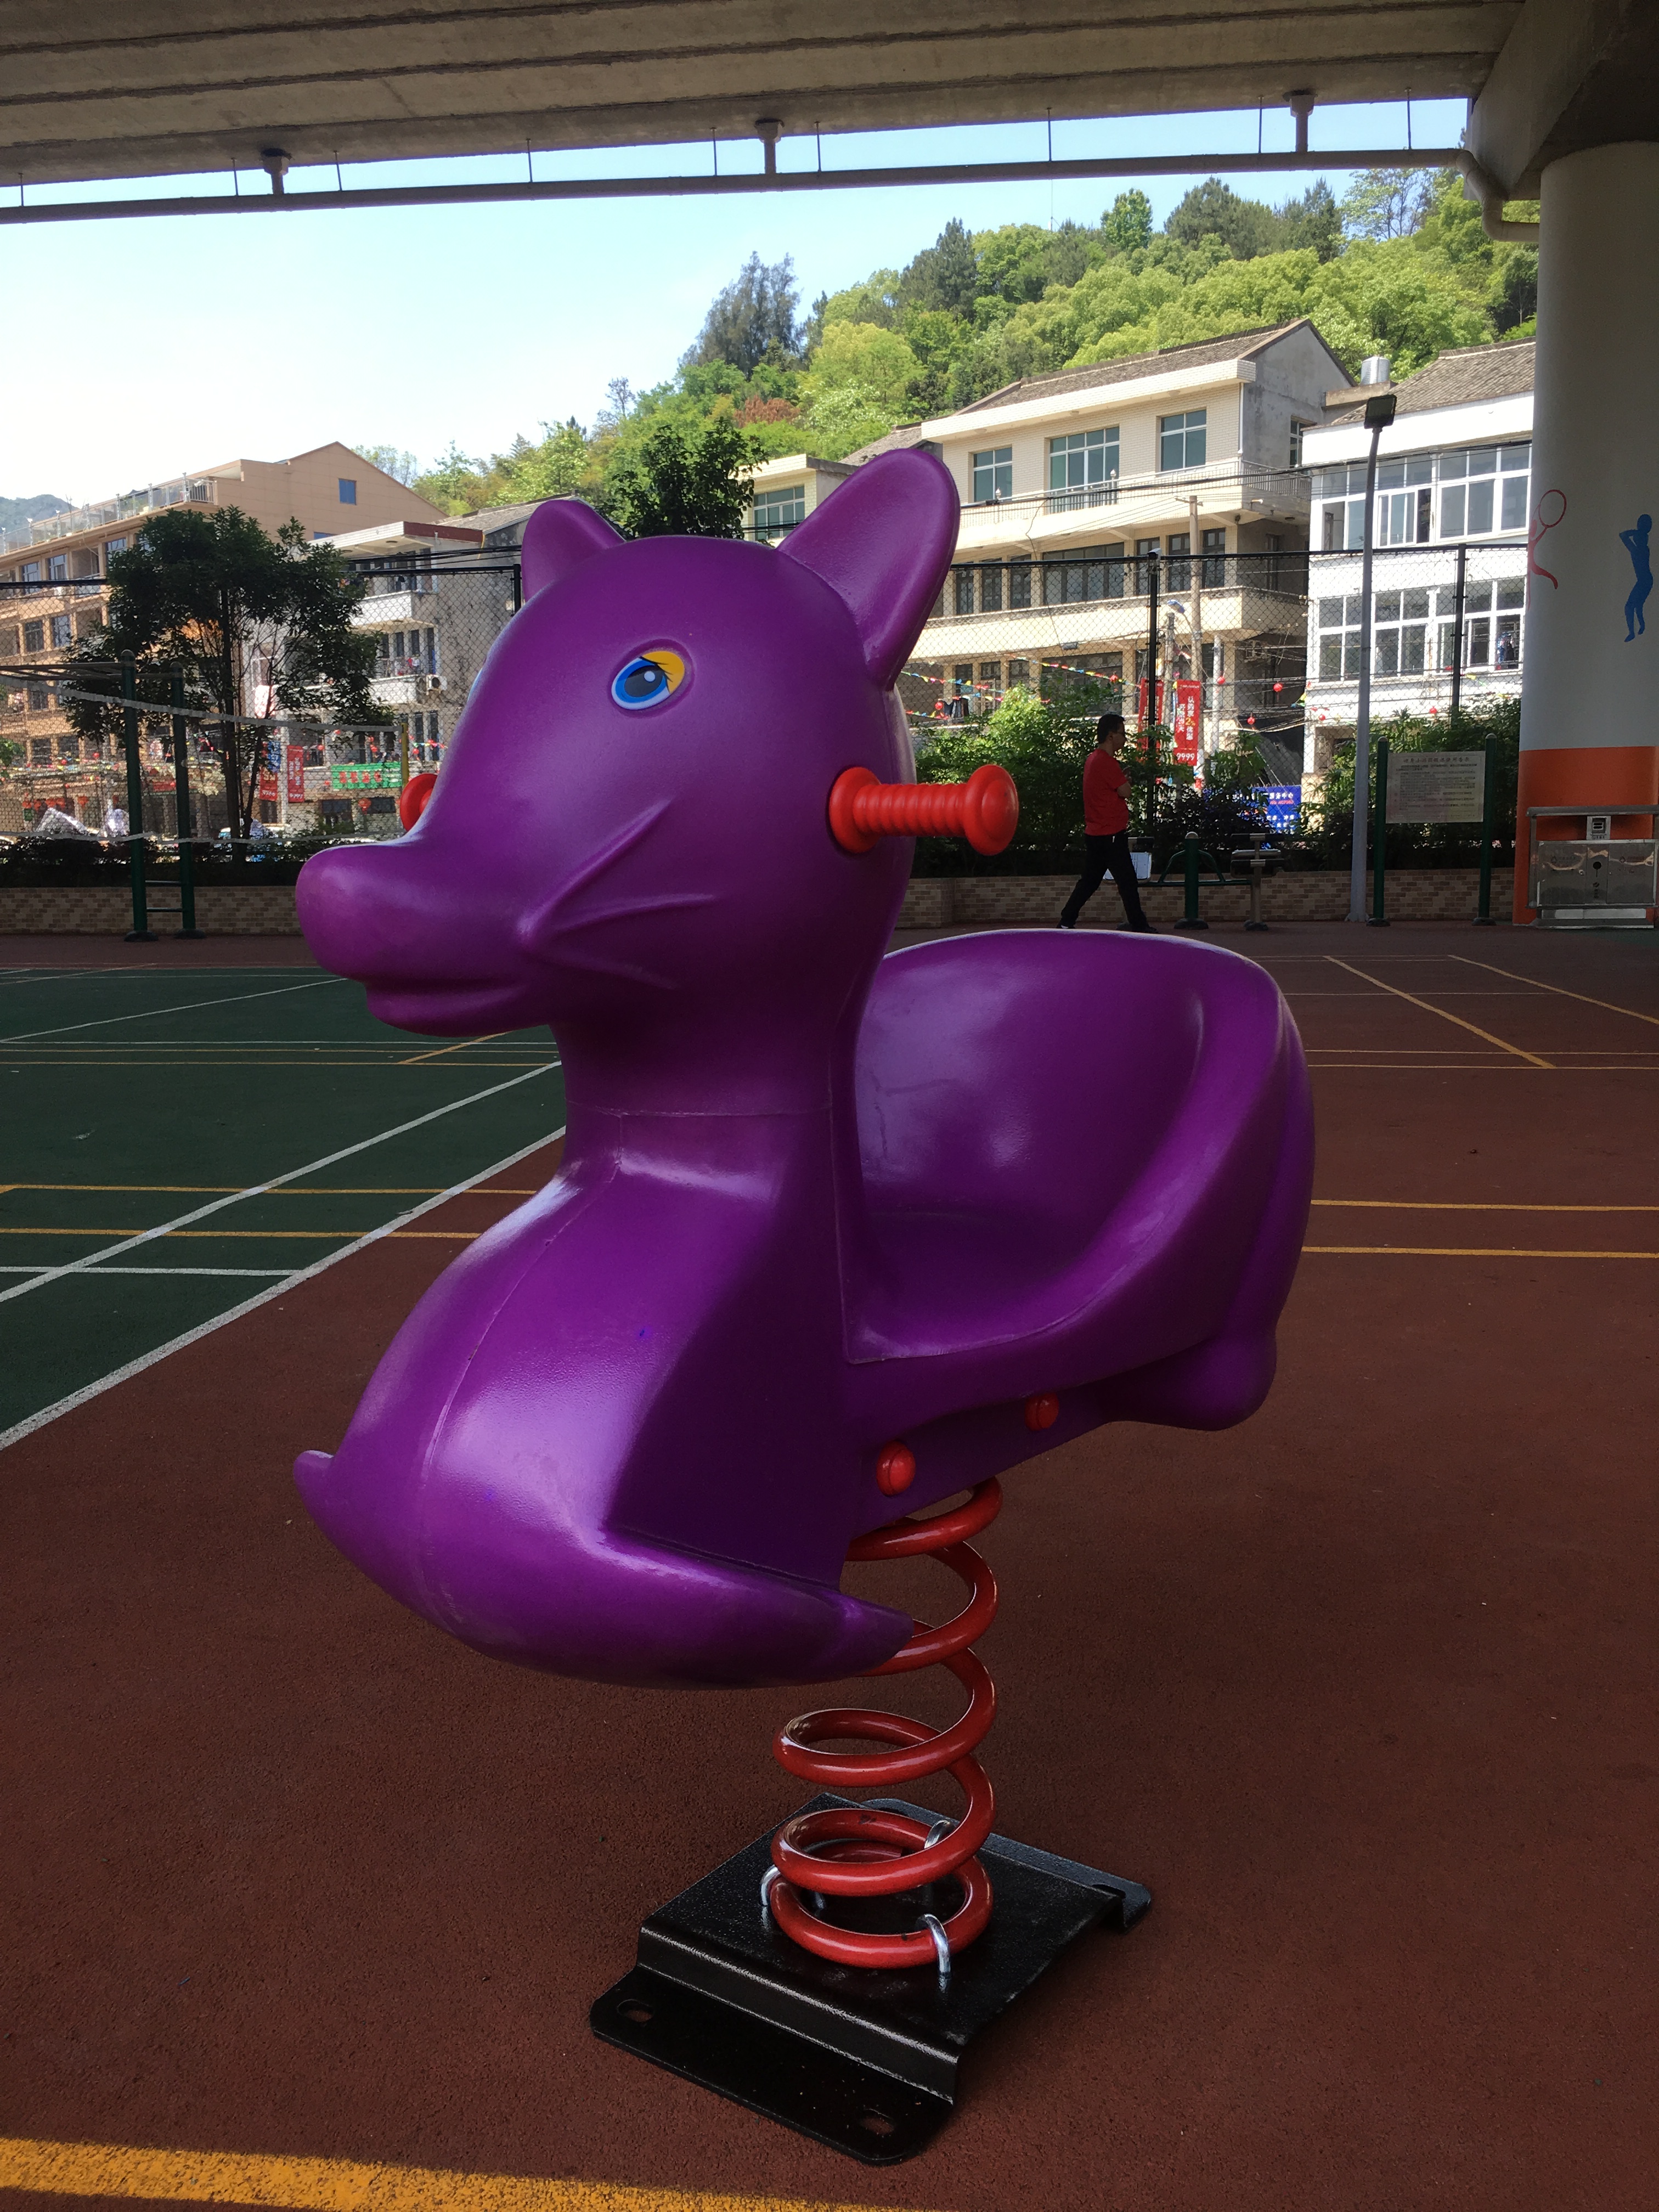 ride on toys horse kids horse toys for children rocking horse riding toys jumping animal toy hobby outdoor playground hopper Y06